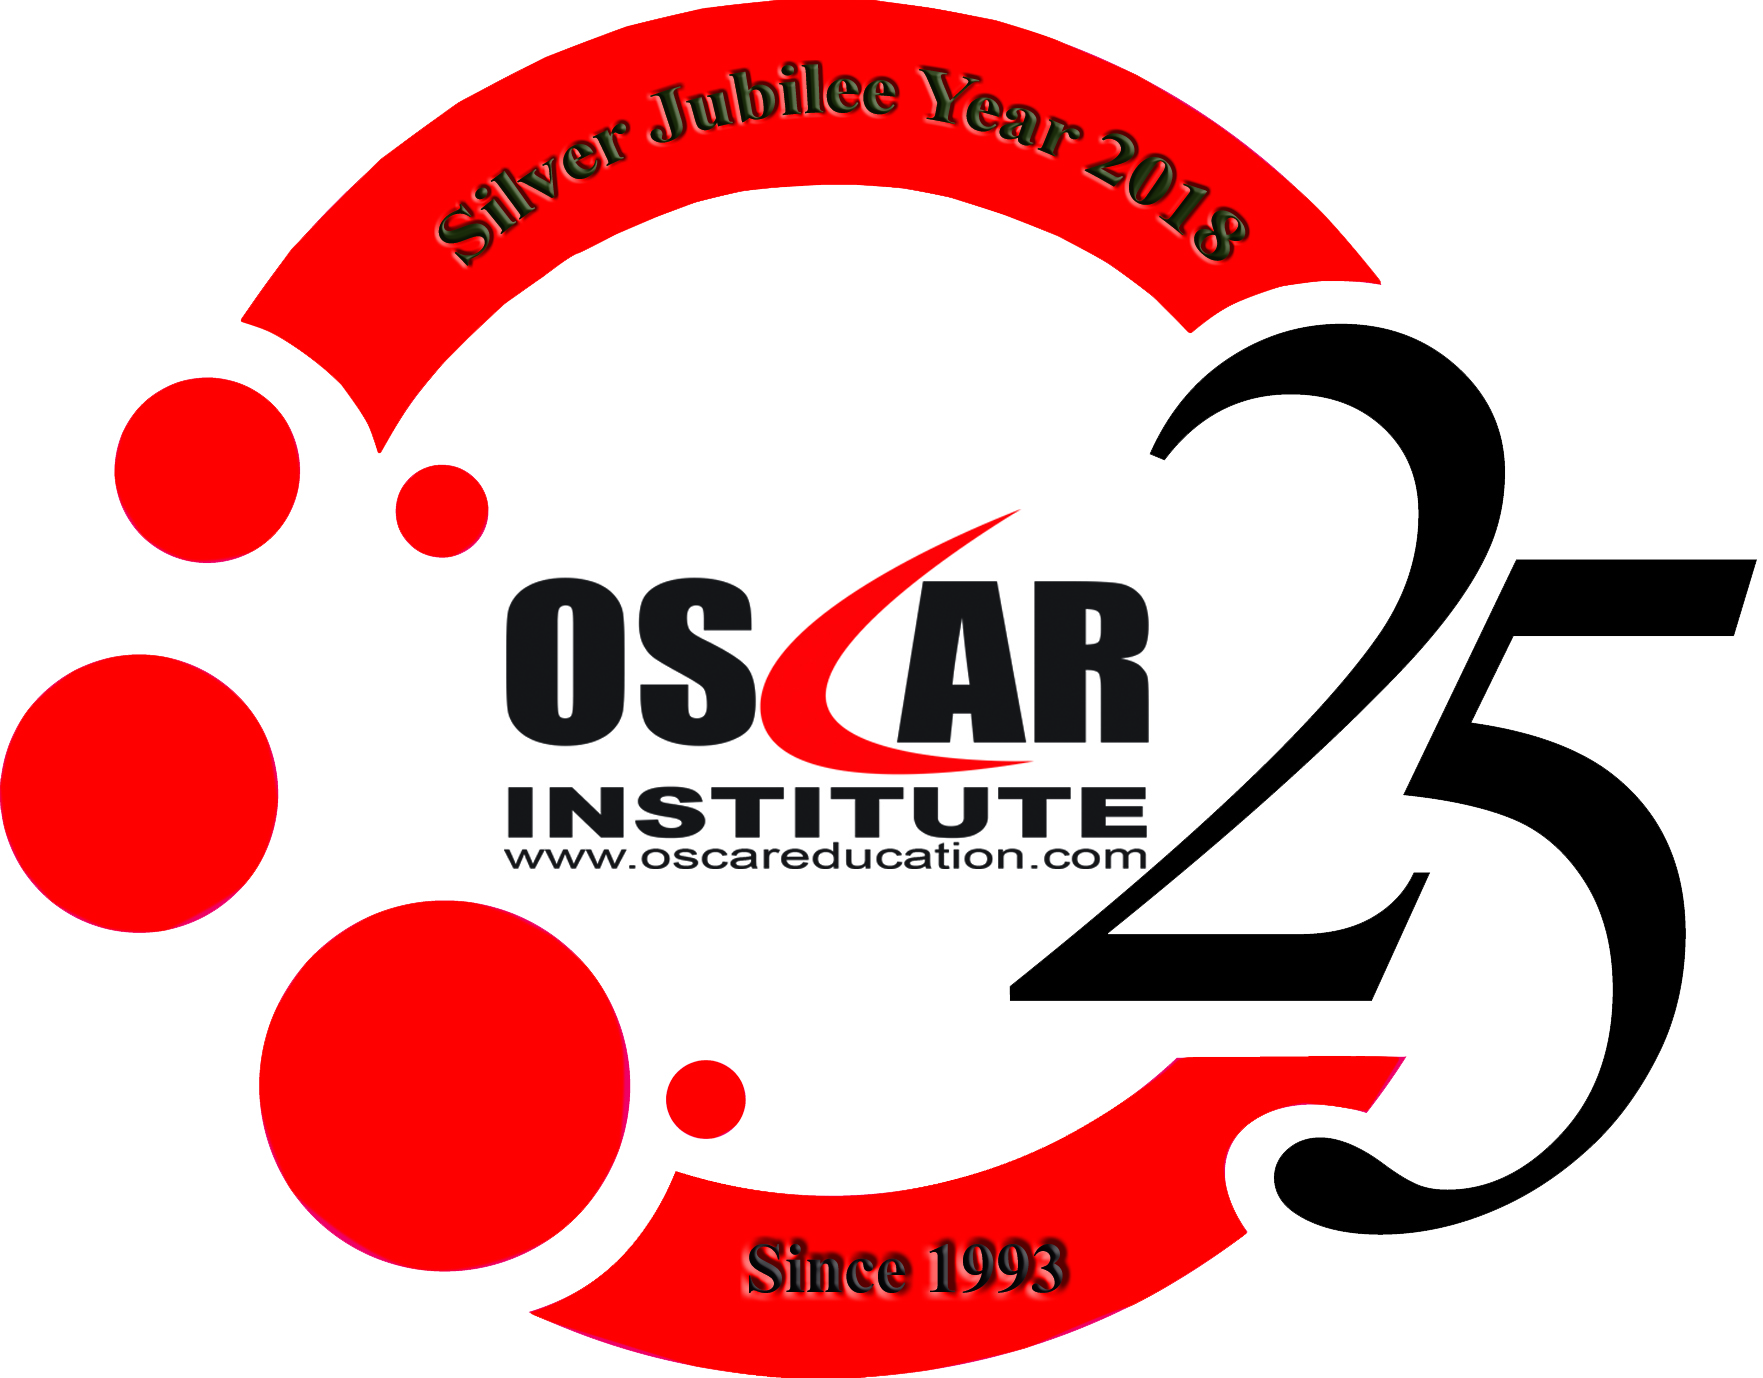 More about Oscar Education Group